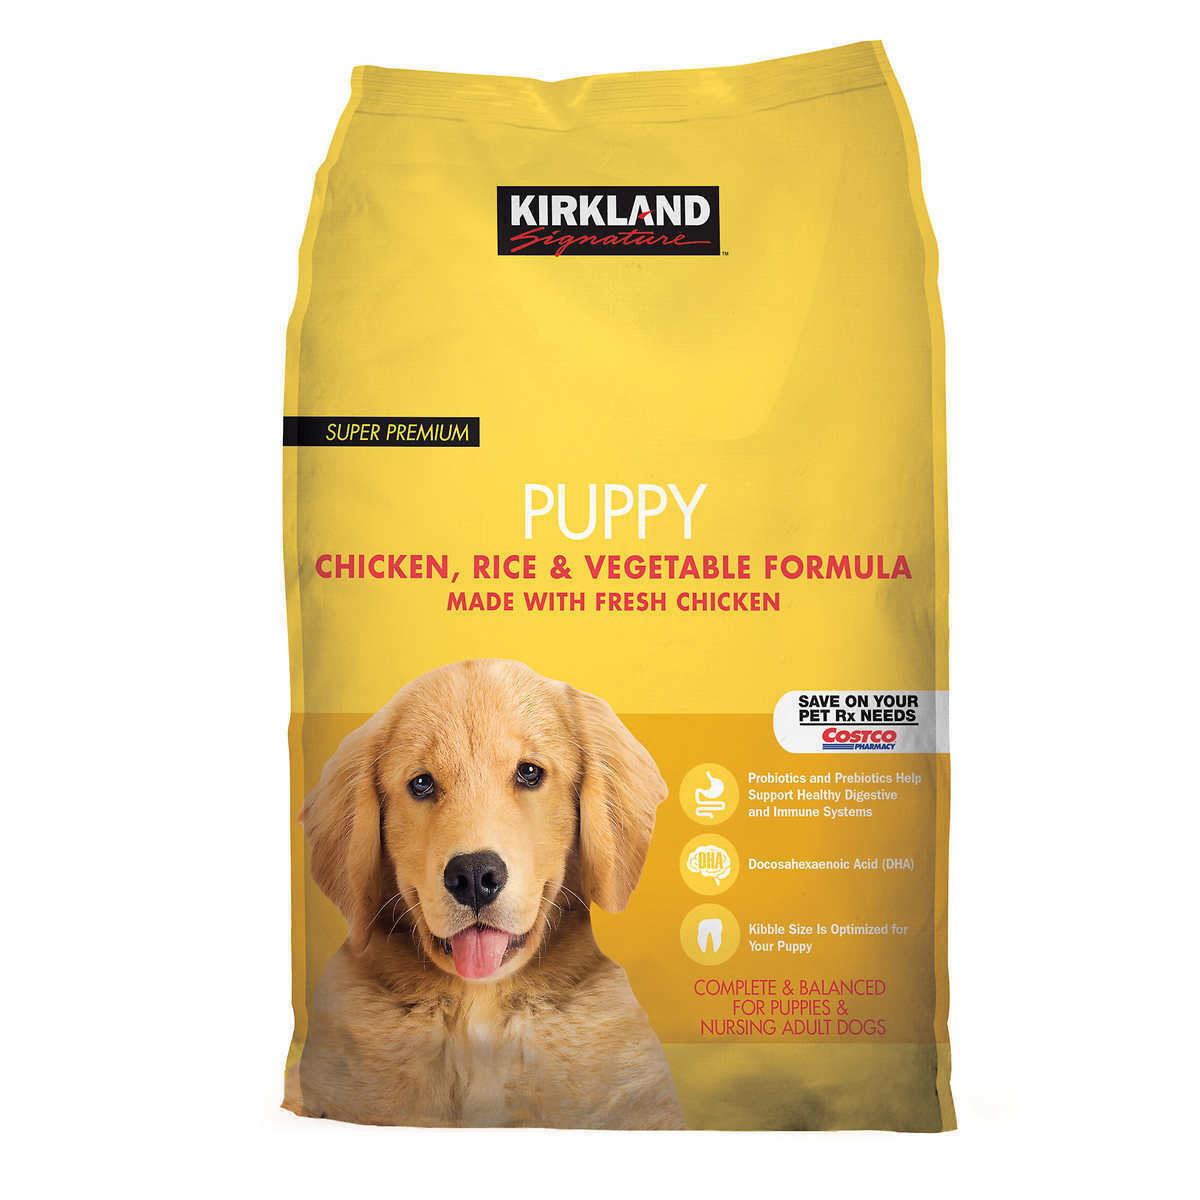 NEW Kirkland Signature Puppy Formula Chicken, Rice and Vegetable Dog Food 20 lb.